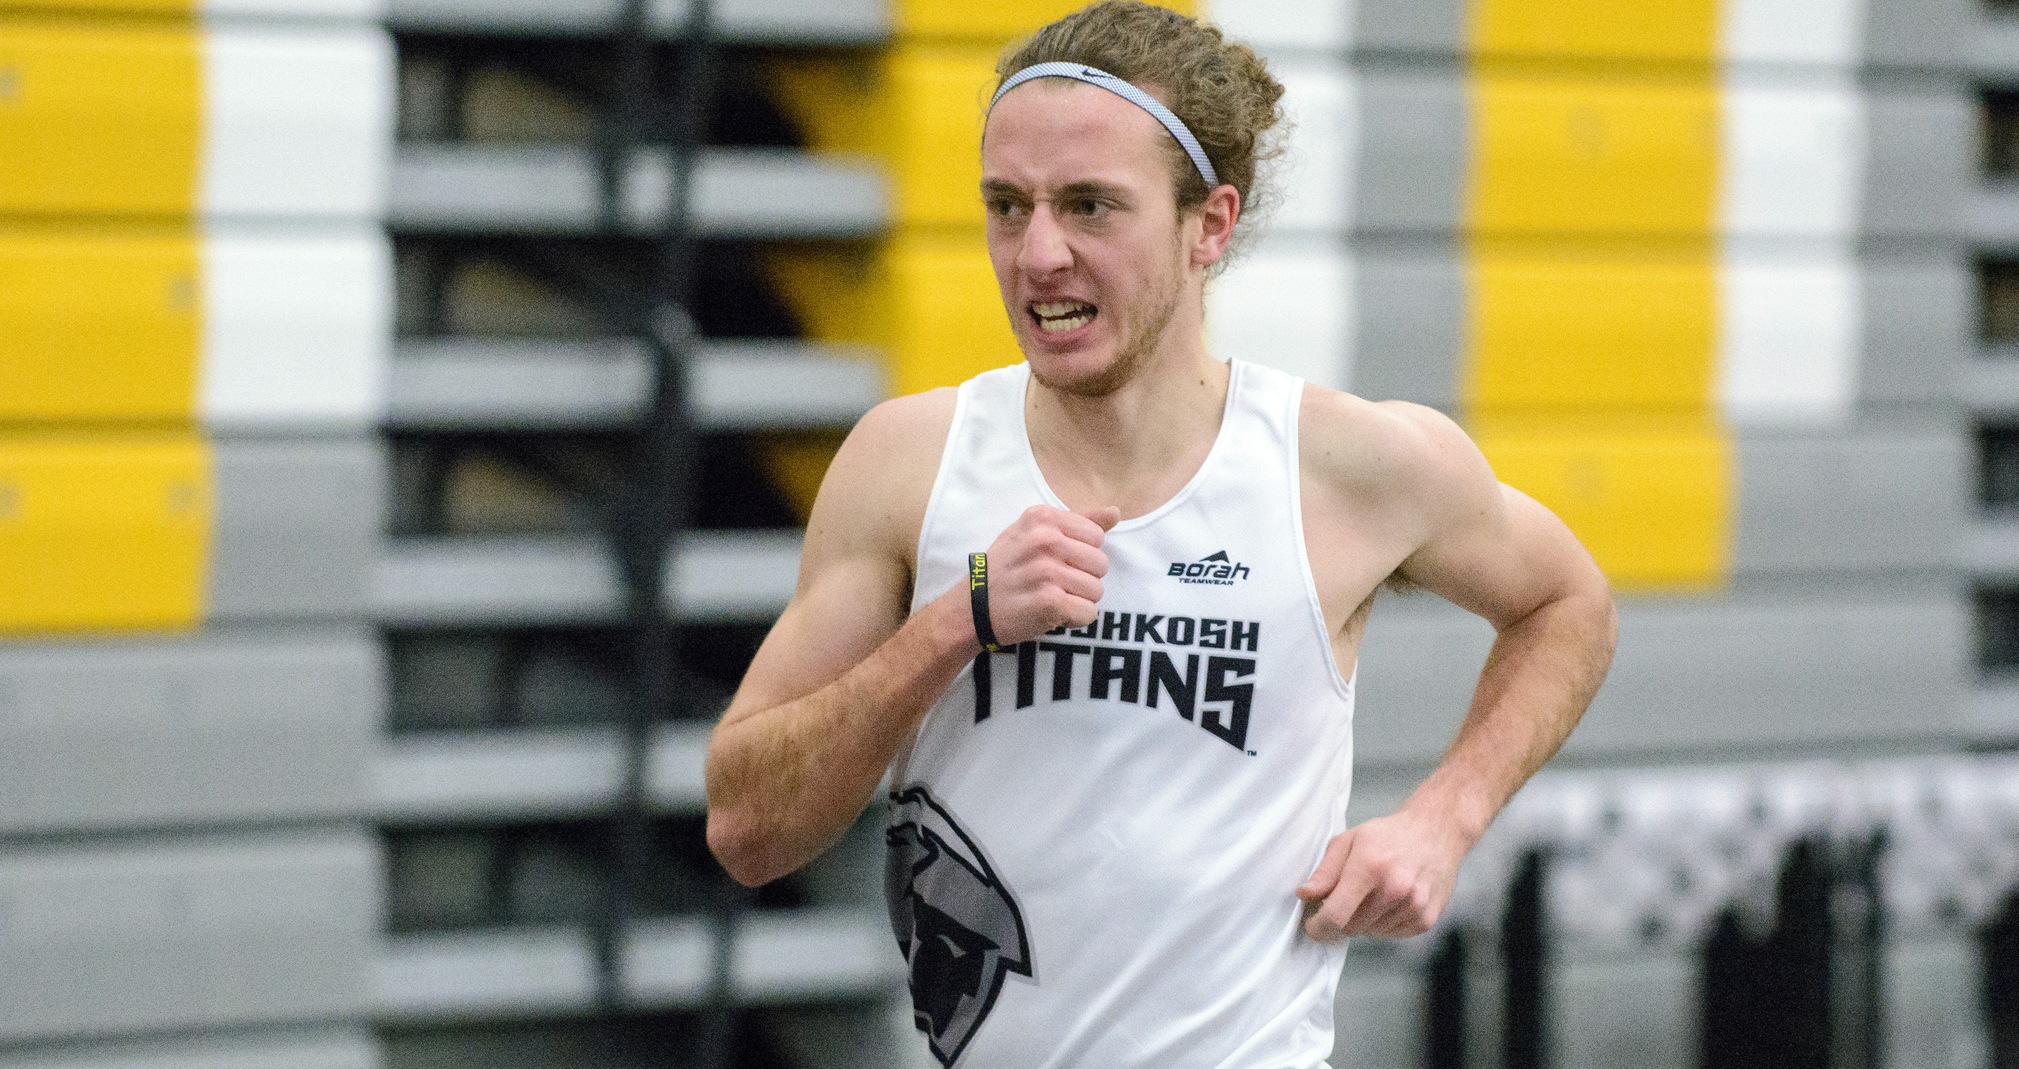 Joe Zack helped UW-Oshkosh earn 17 points in the 3,000-meter run with his winning time of 8:46.11.